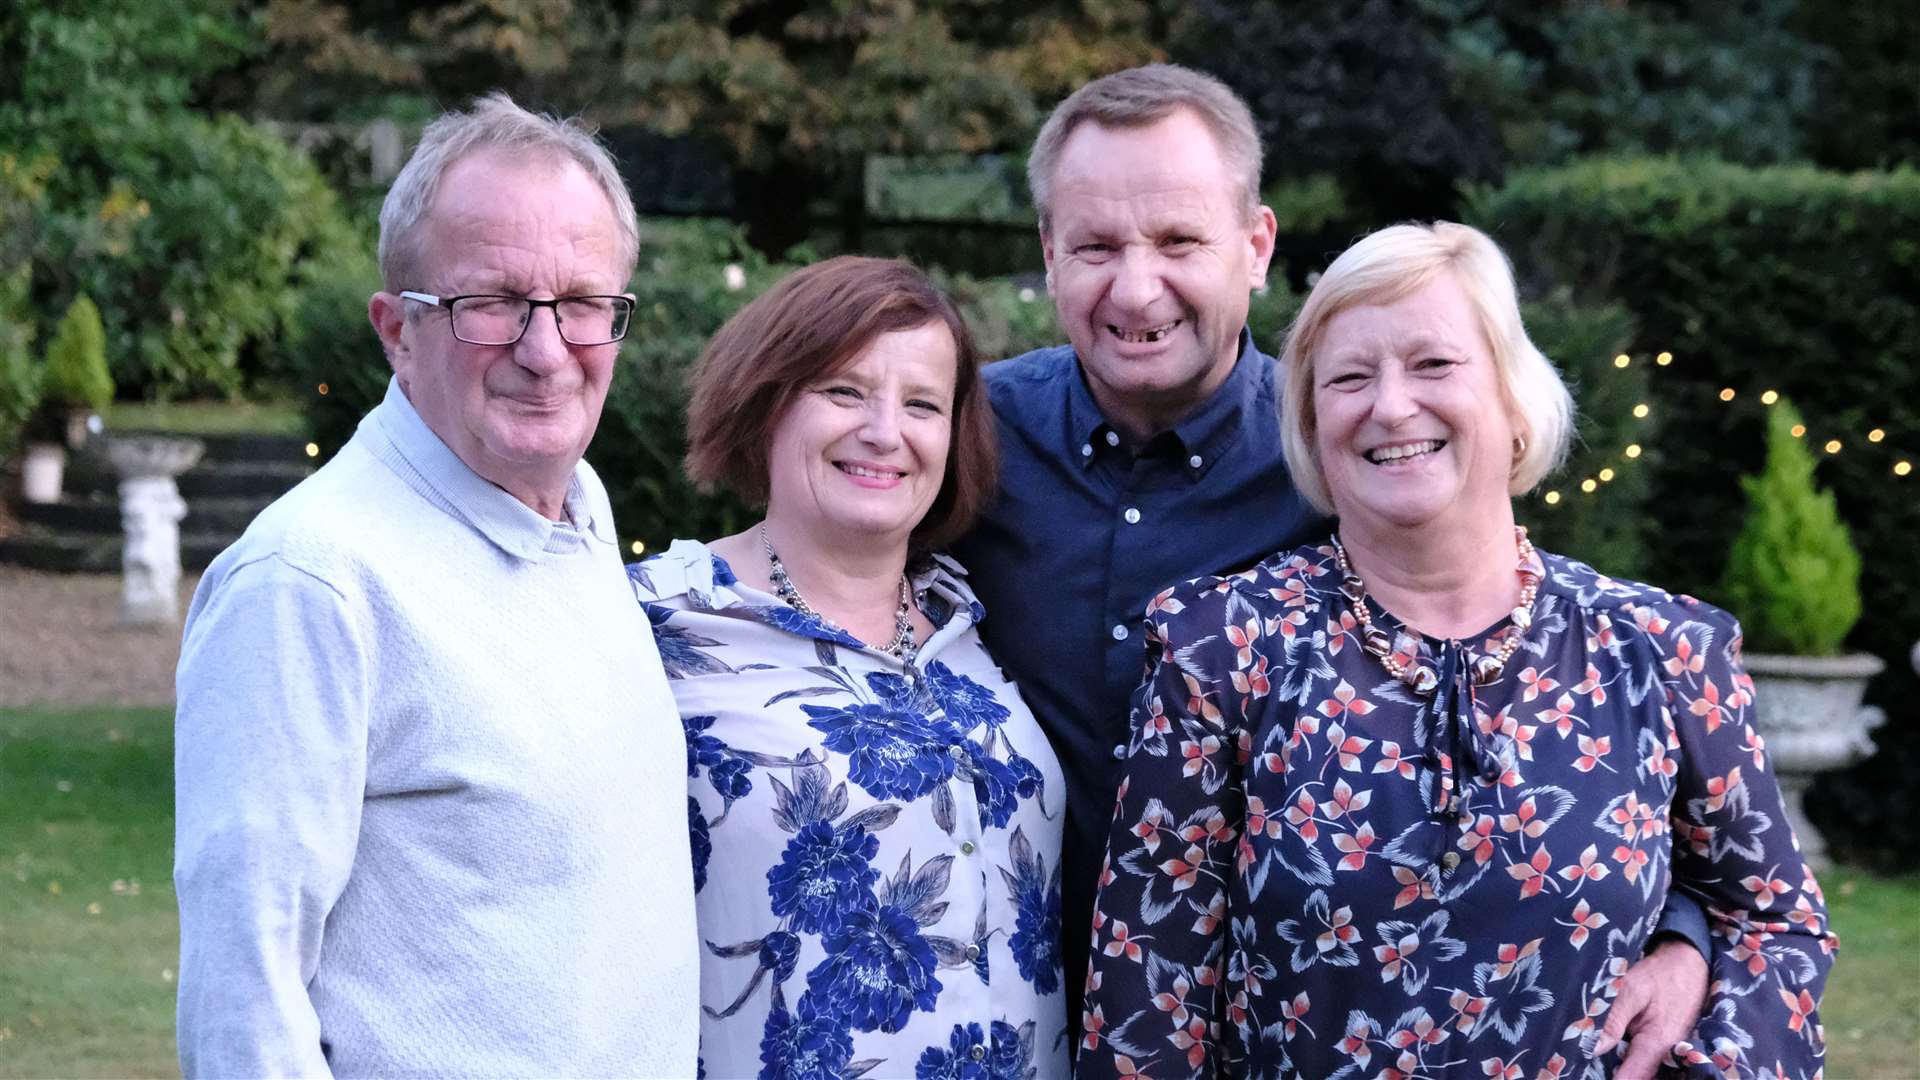 Simon is reunited with his family on tonight's programme Photo: ITV